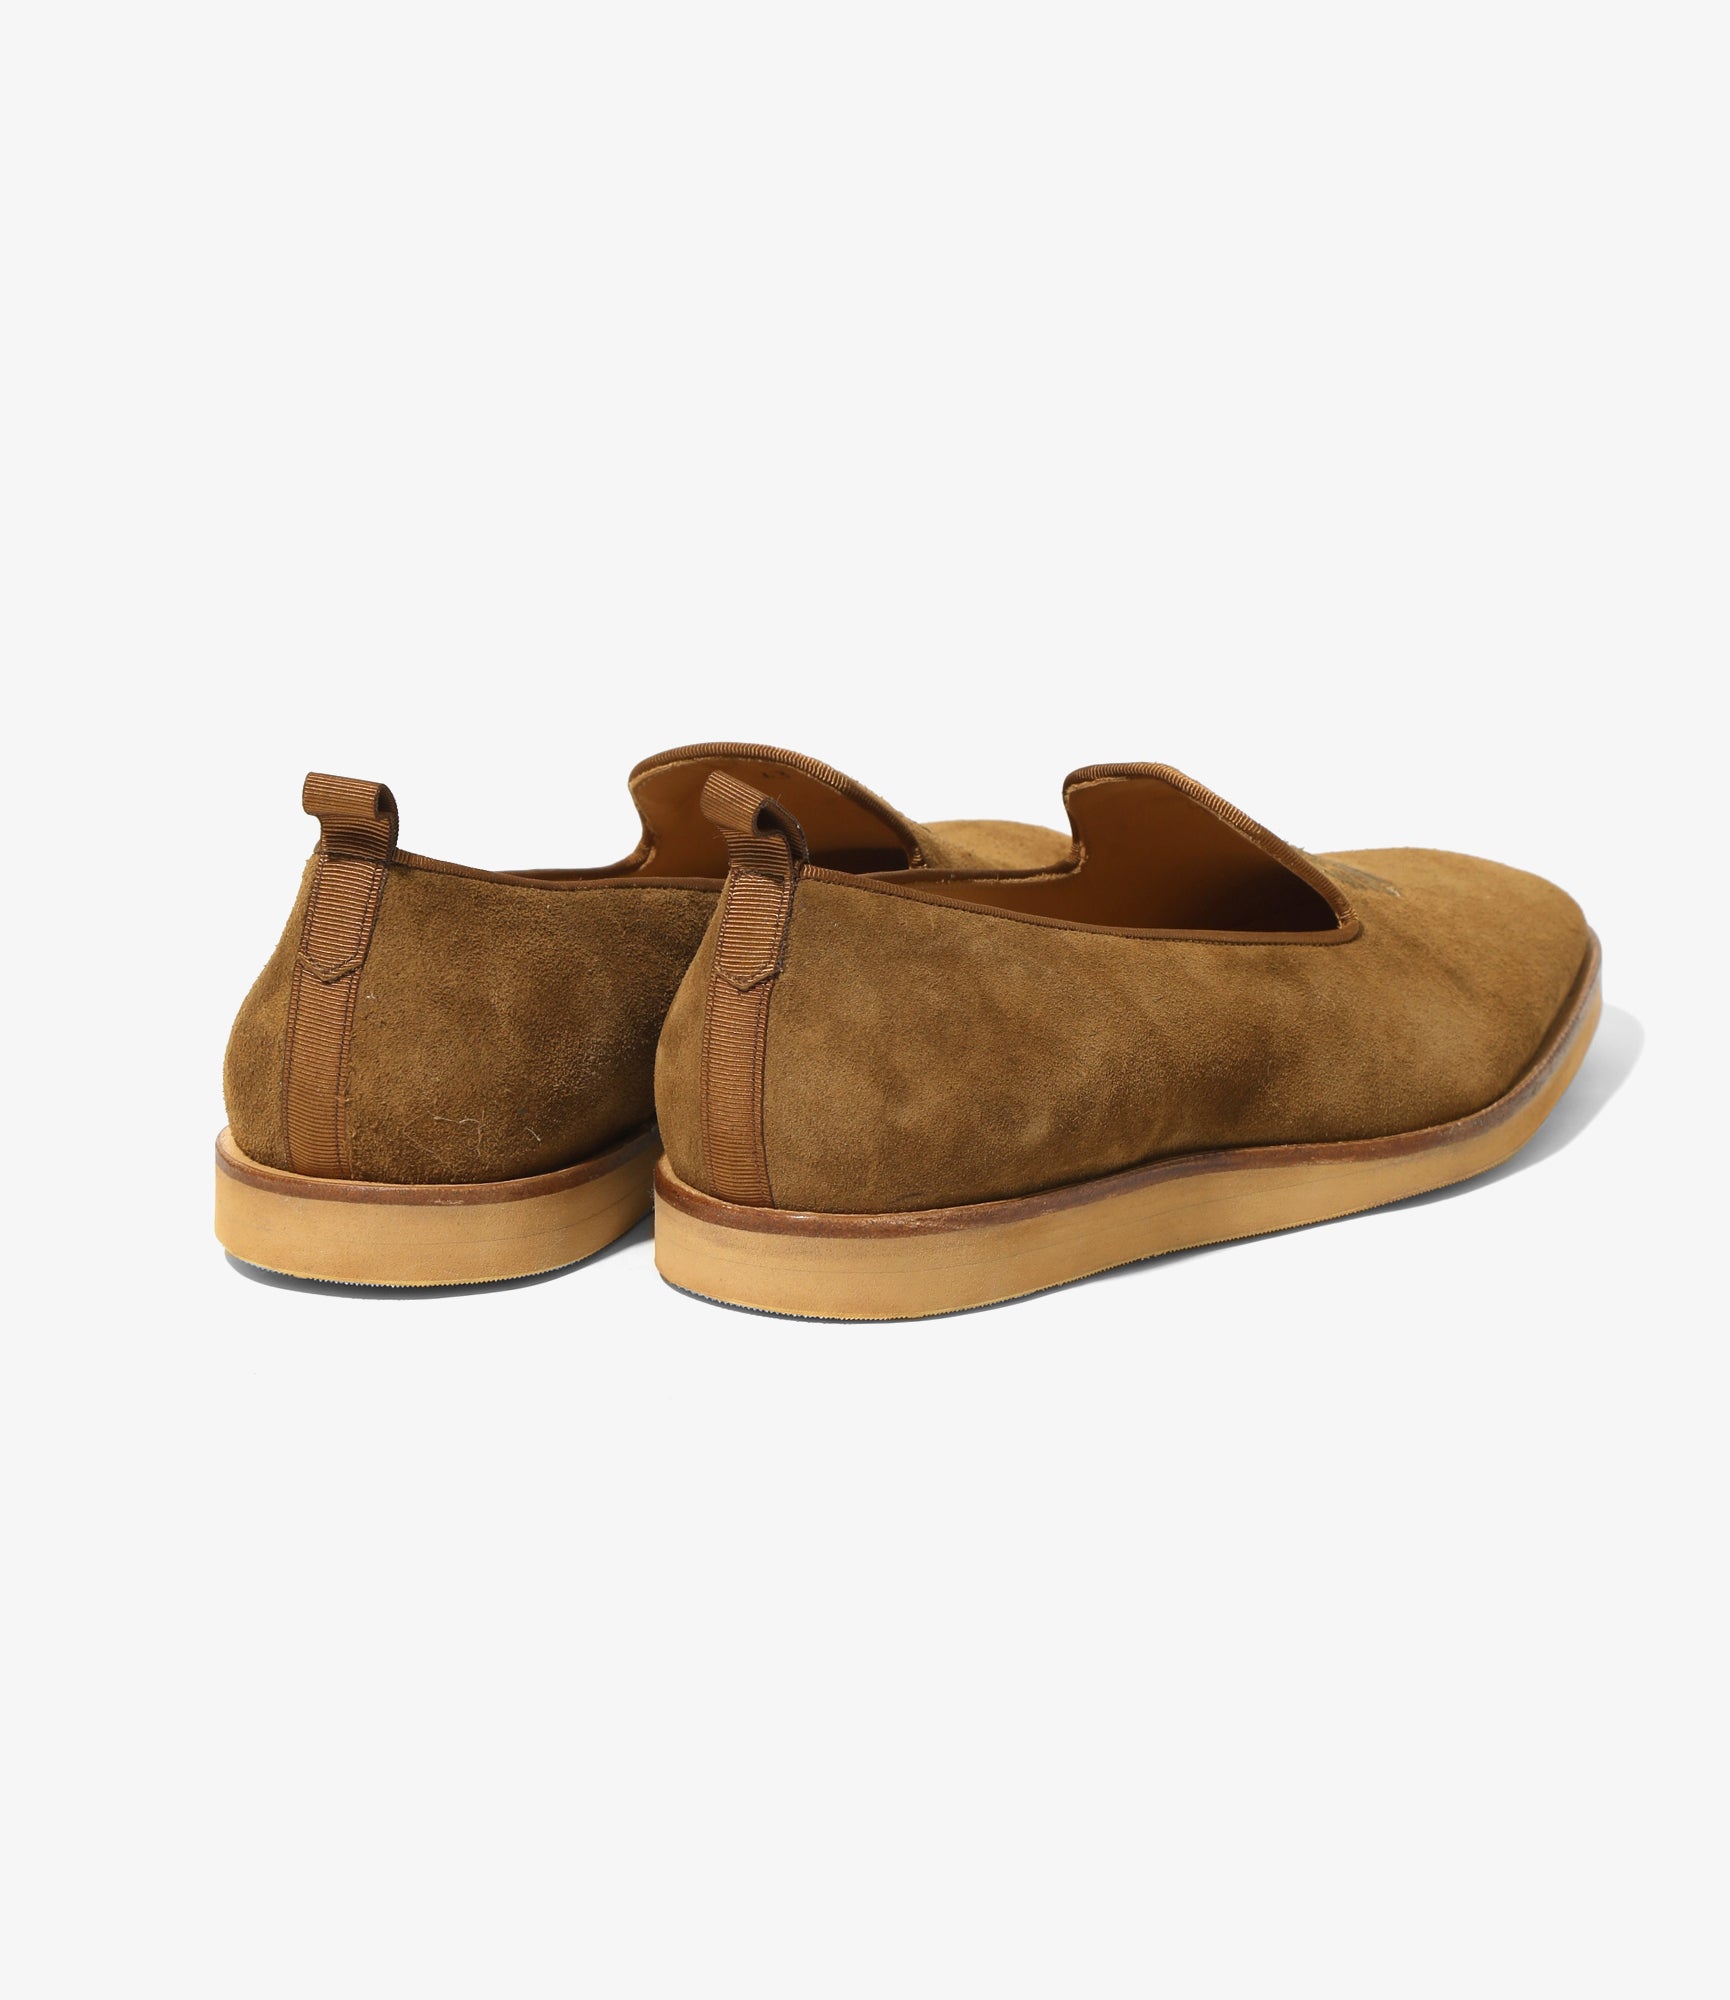 Needles Papillon Emb Slip-On - Brown Suede